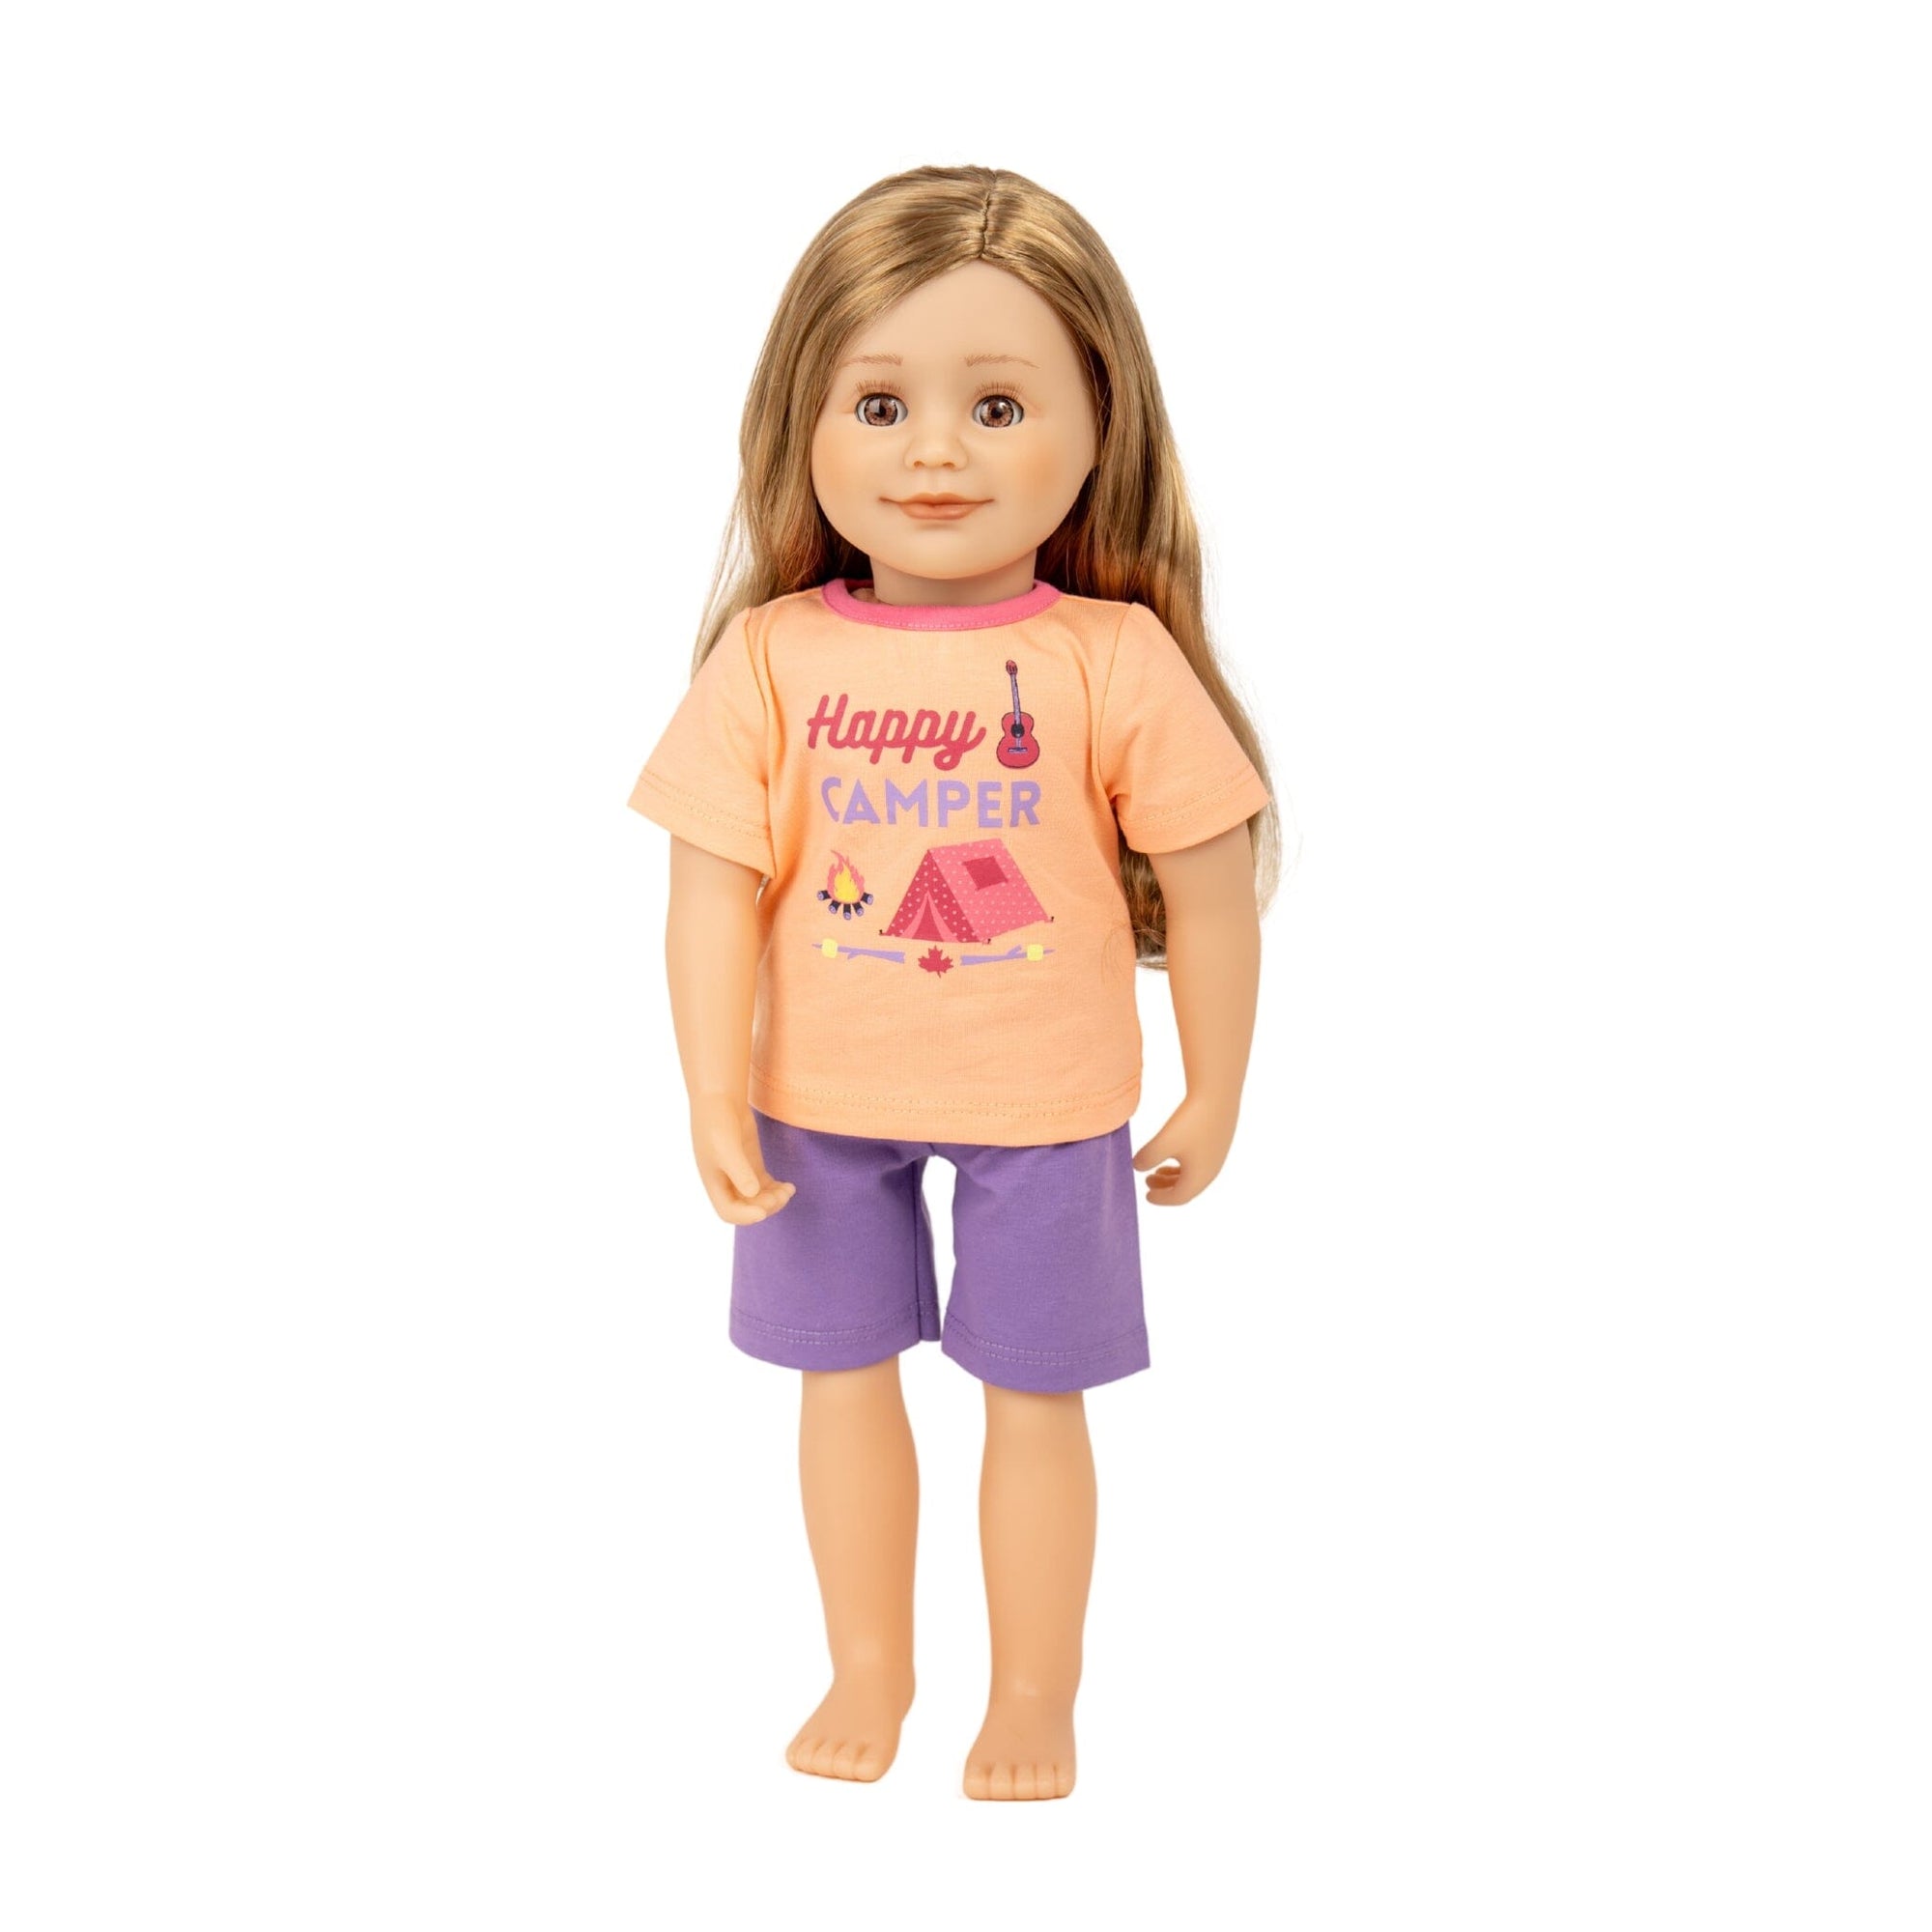  Pajamas for 18-Inch dolls like Maplelea with peach graphic t-shirt top design and purple shorts 